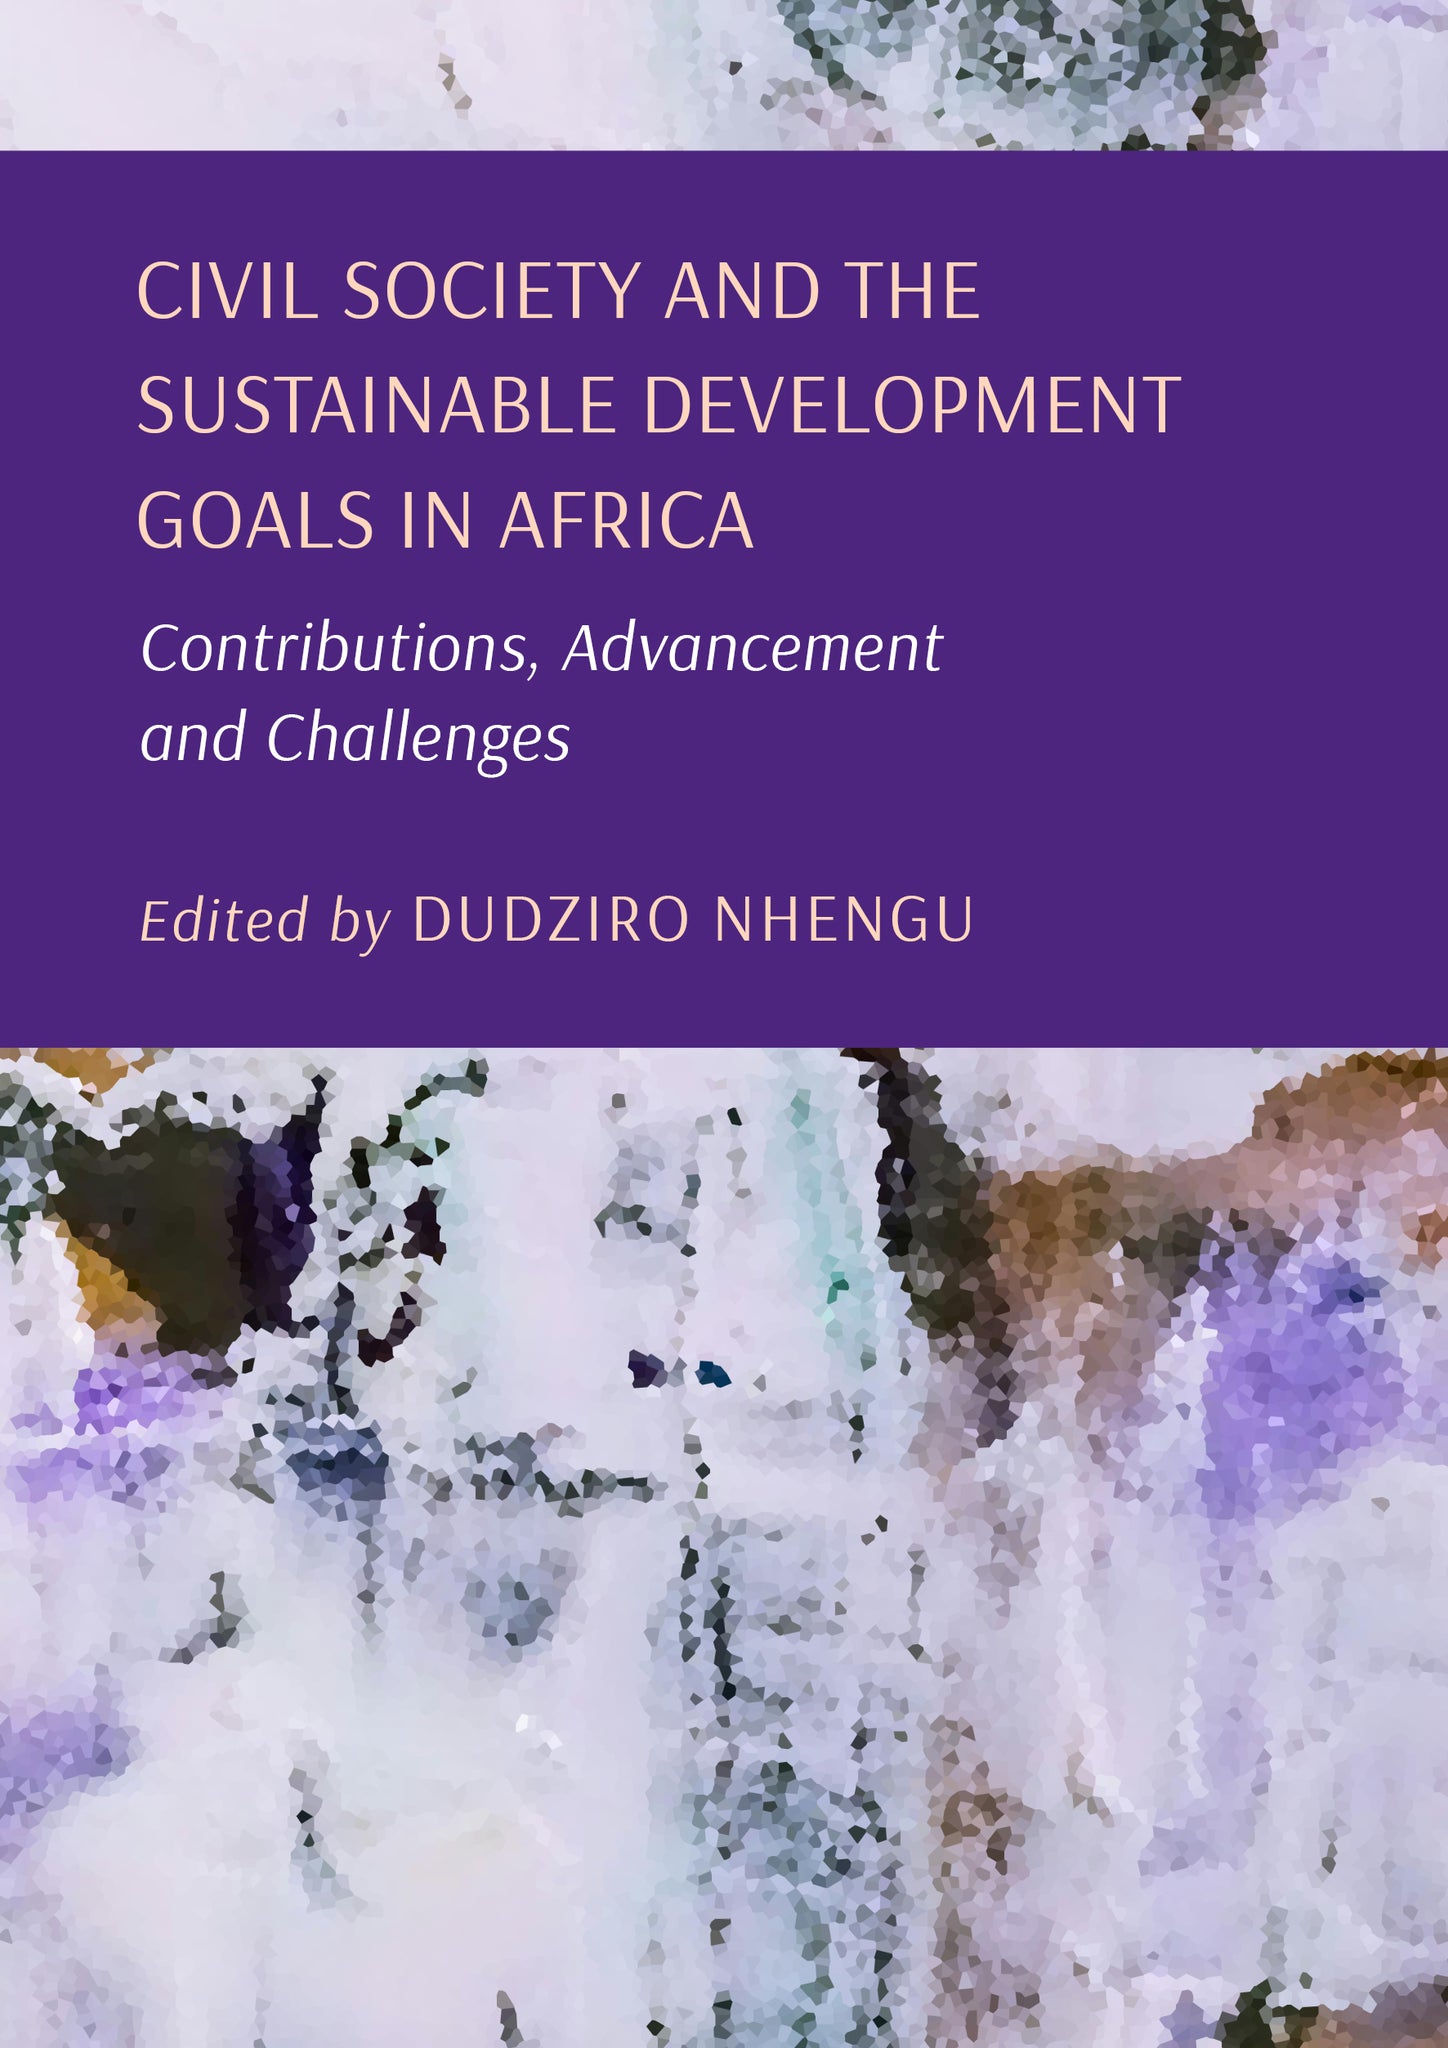 Civil Society and the Sustainable Development Goals in Africa: Contributions, Advancement and Challenges